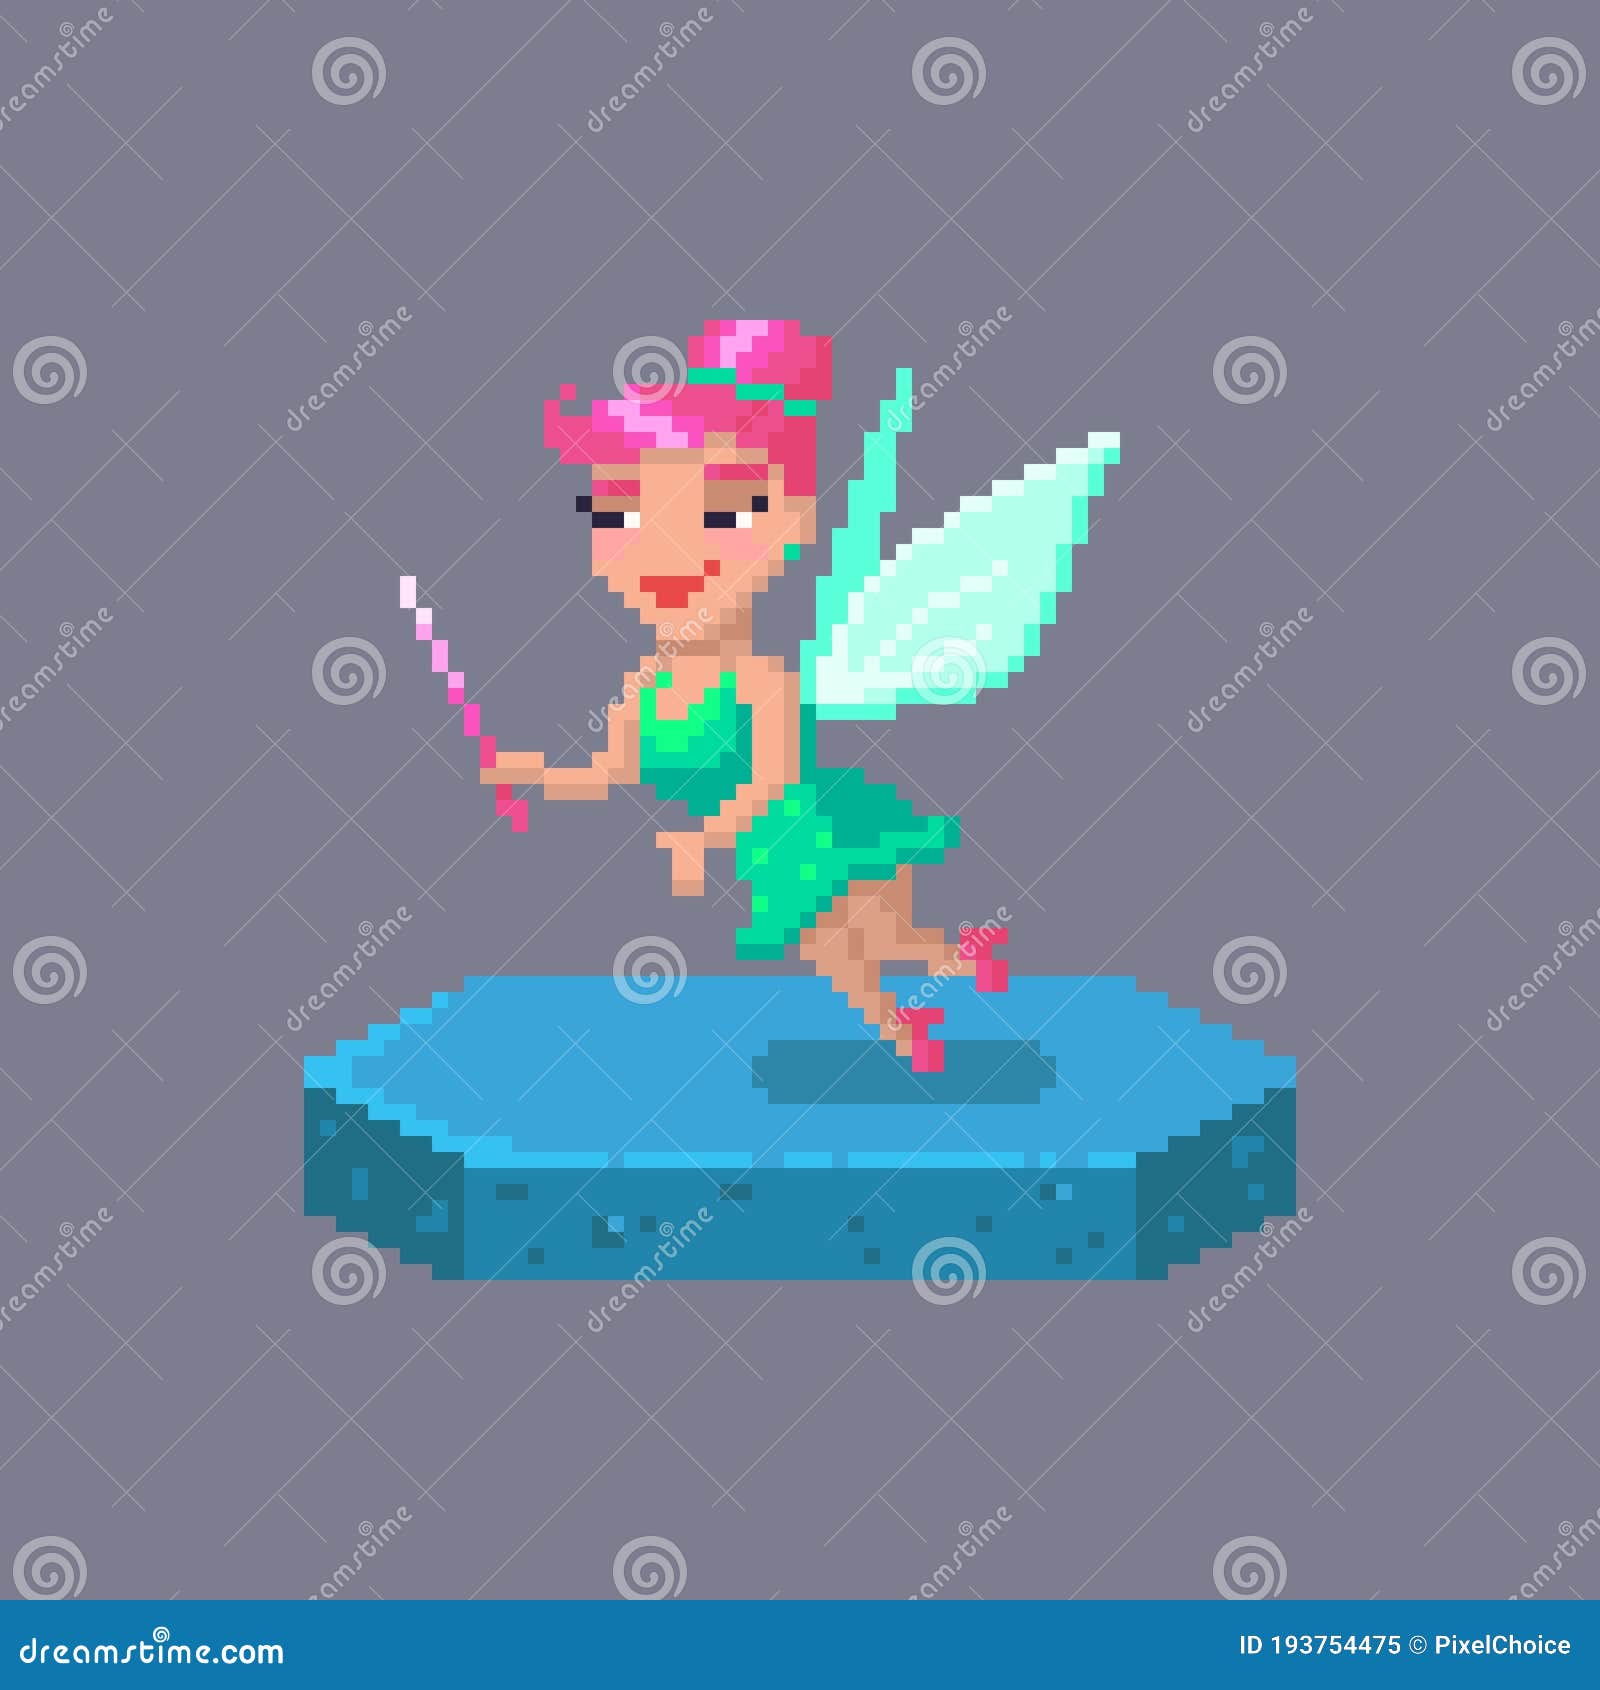 pixel art flying fairy character. fairytale personage